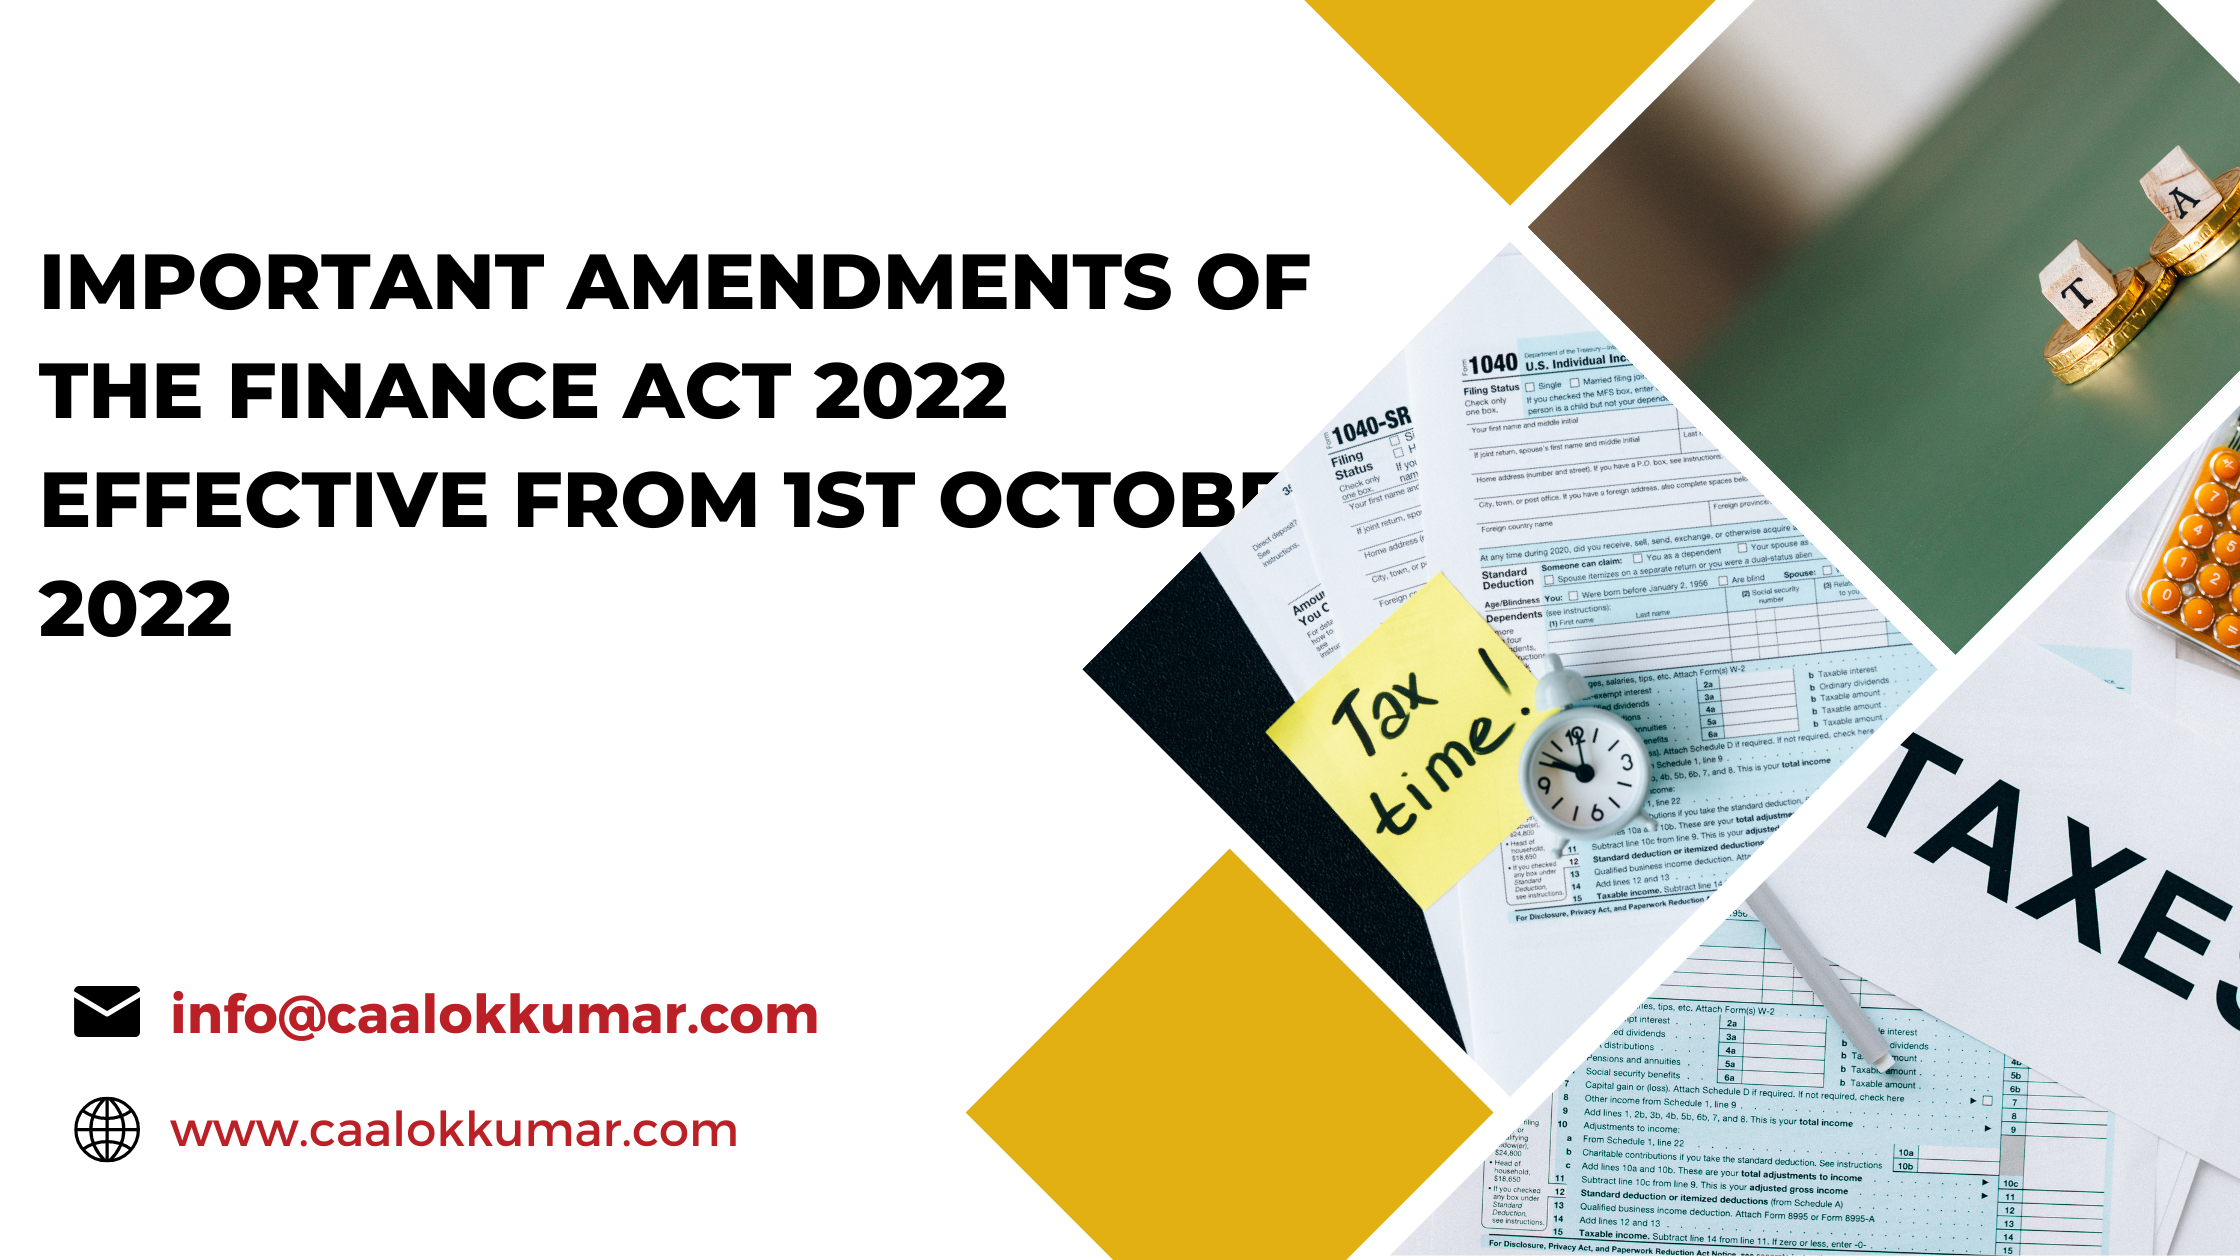 Important Amendments Of The Finance Act 2022 Effective From 1st October